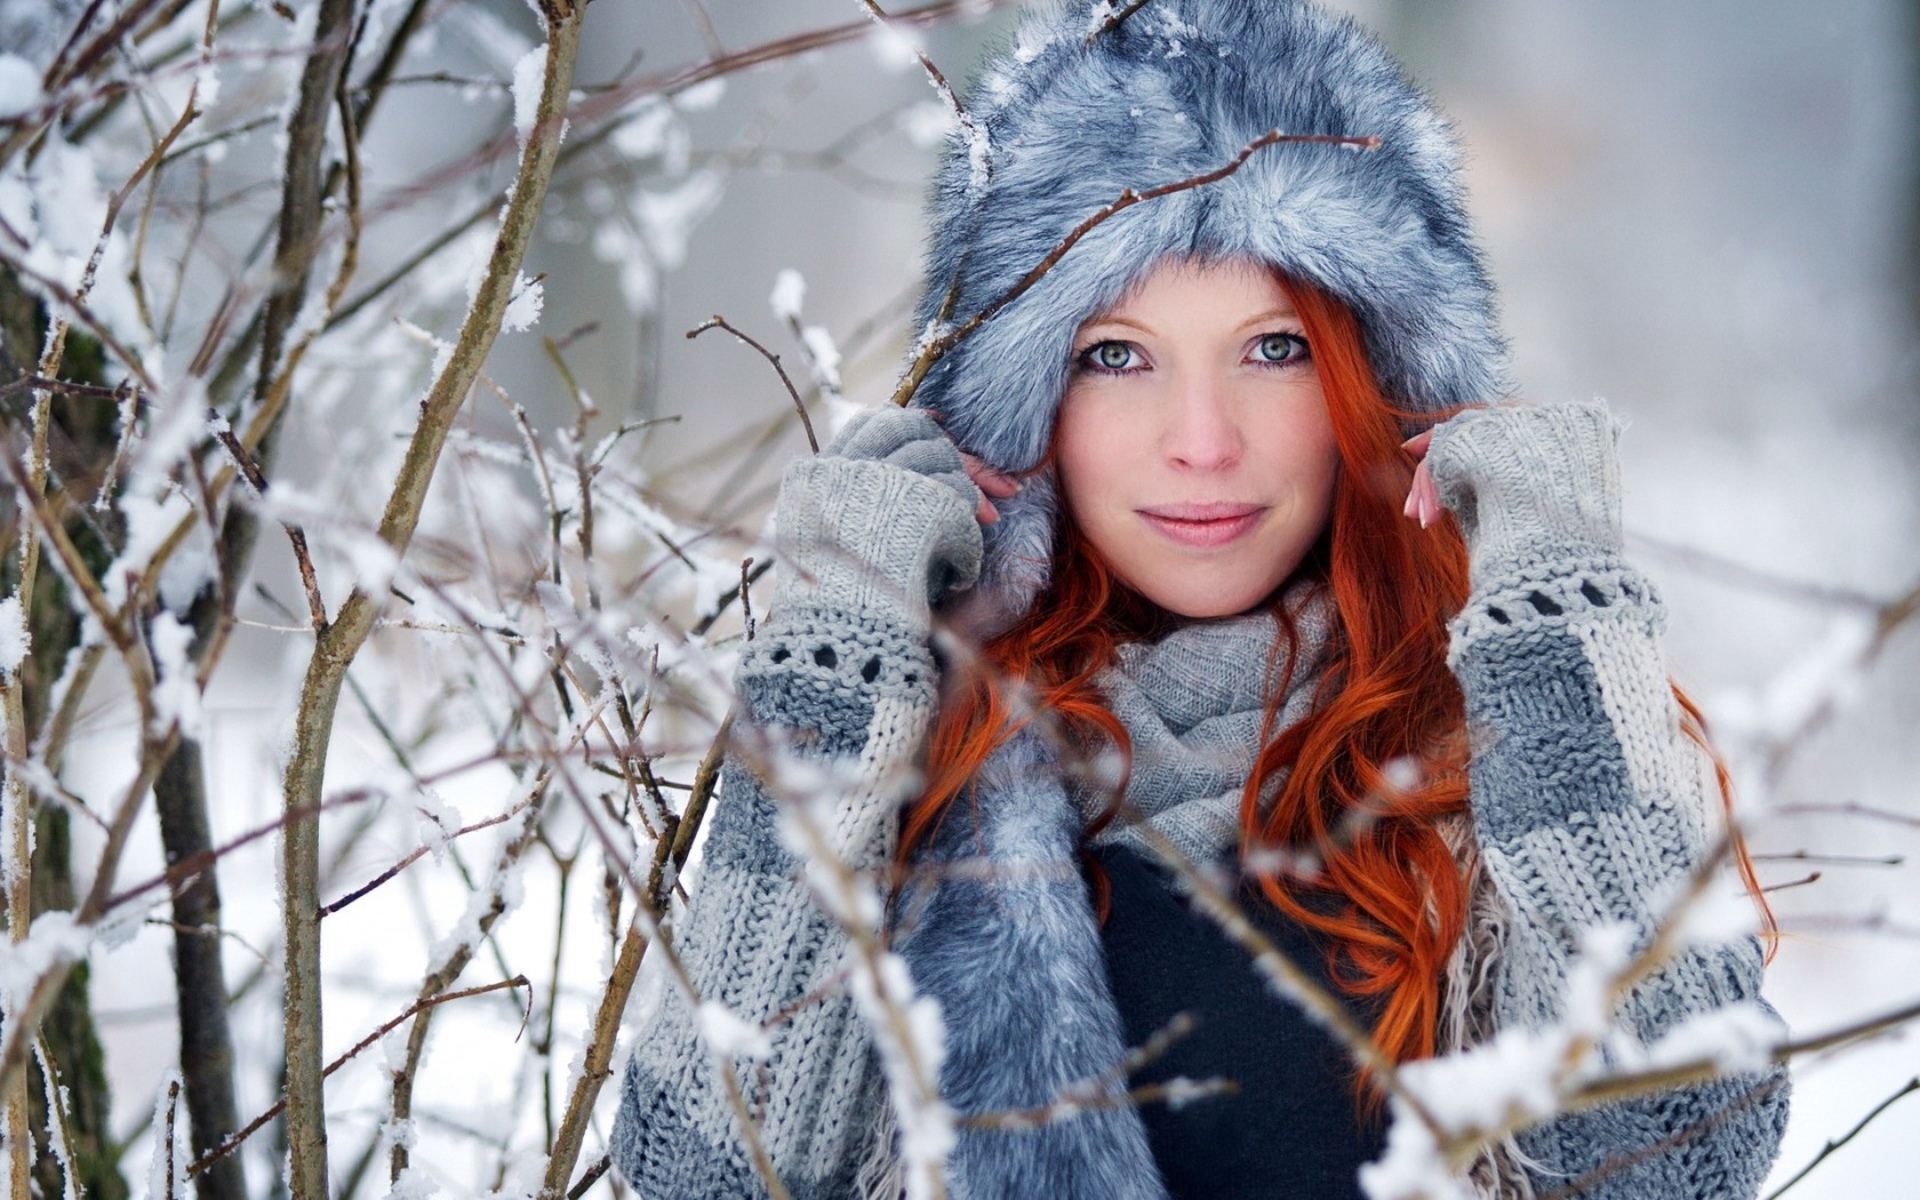 women, Females, Face, Eyes, Pov, Winter, Snow, Fashion, Glamour, Models, Babes, Redheads Wallpaper